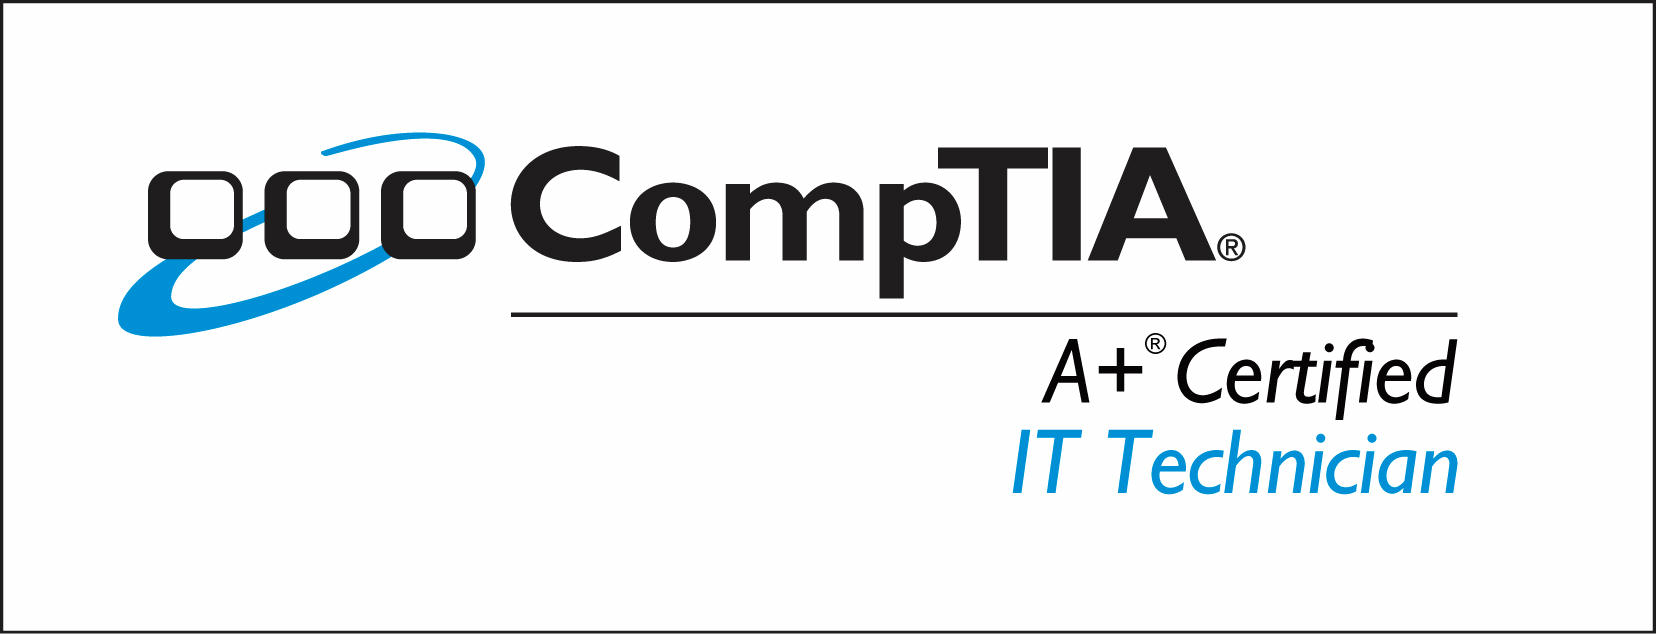 Networking compTIA